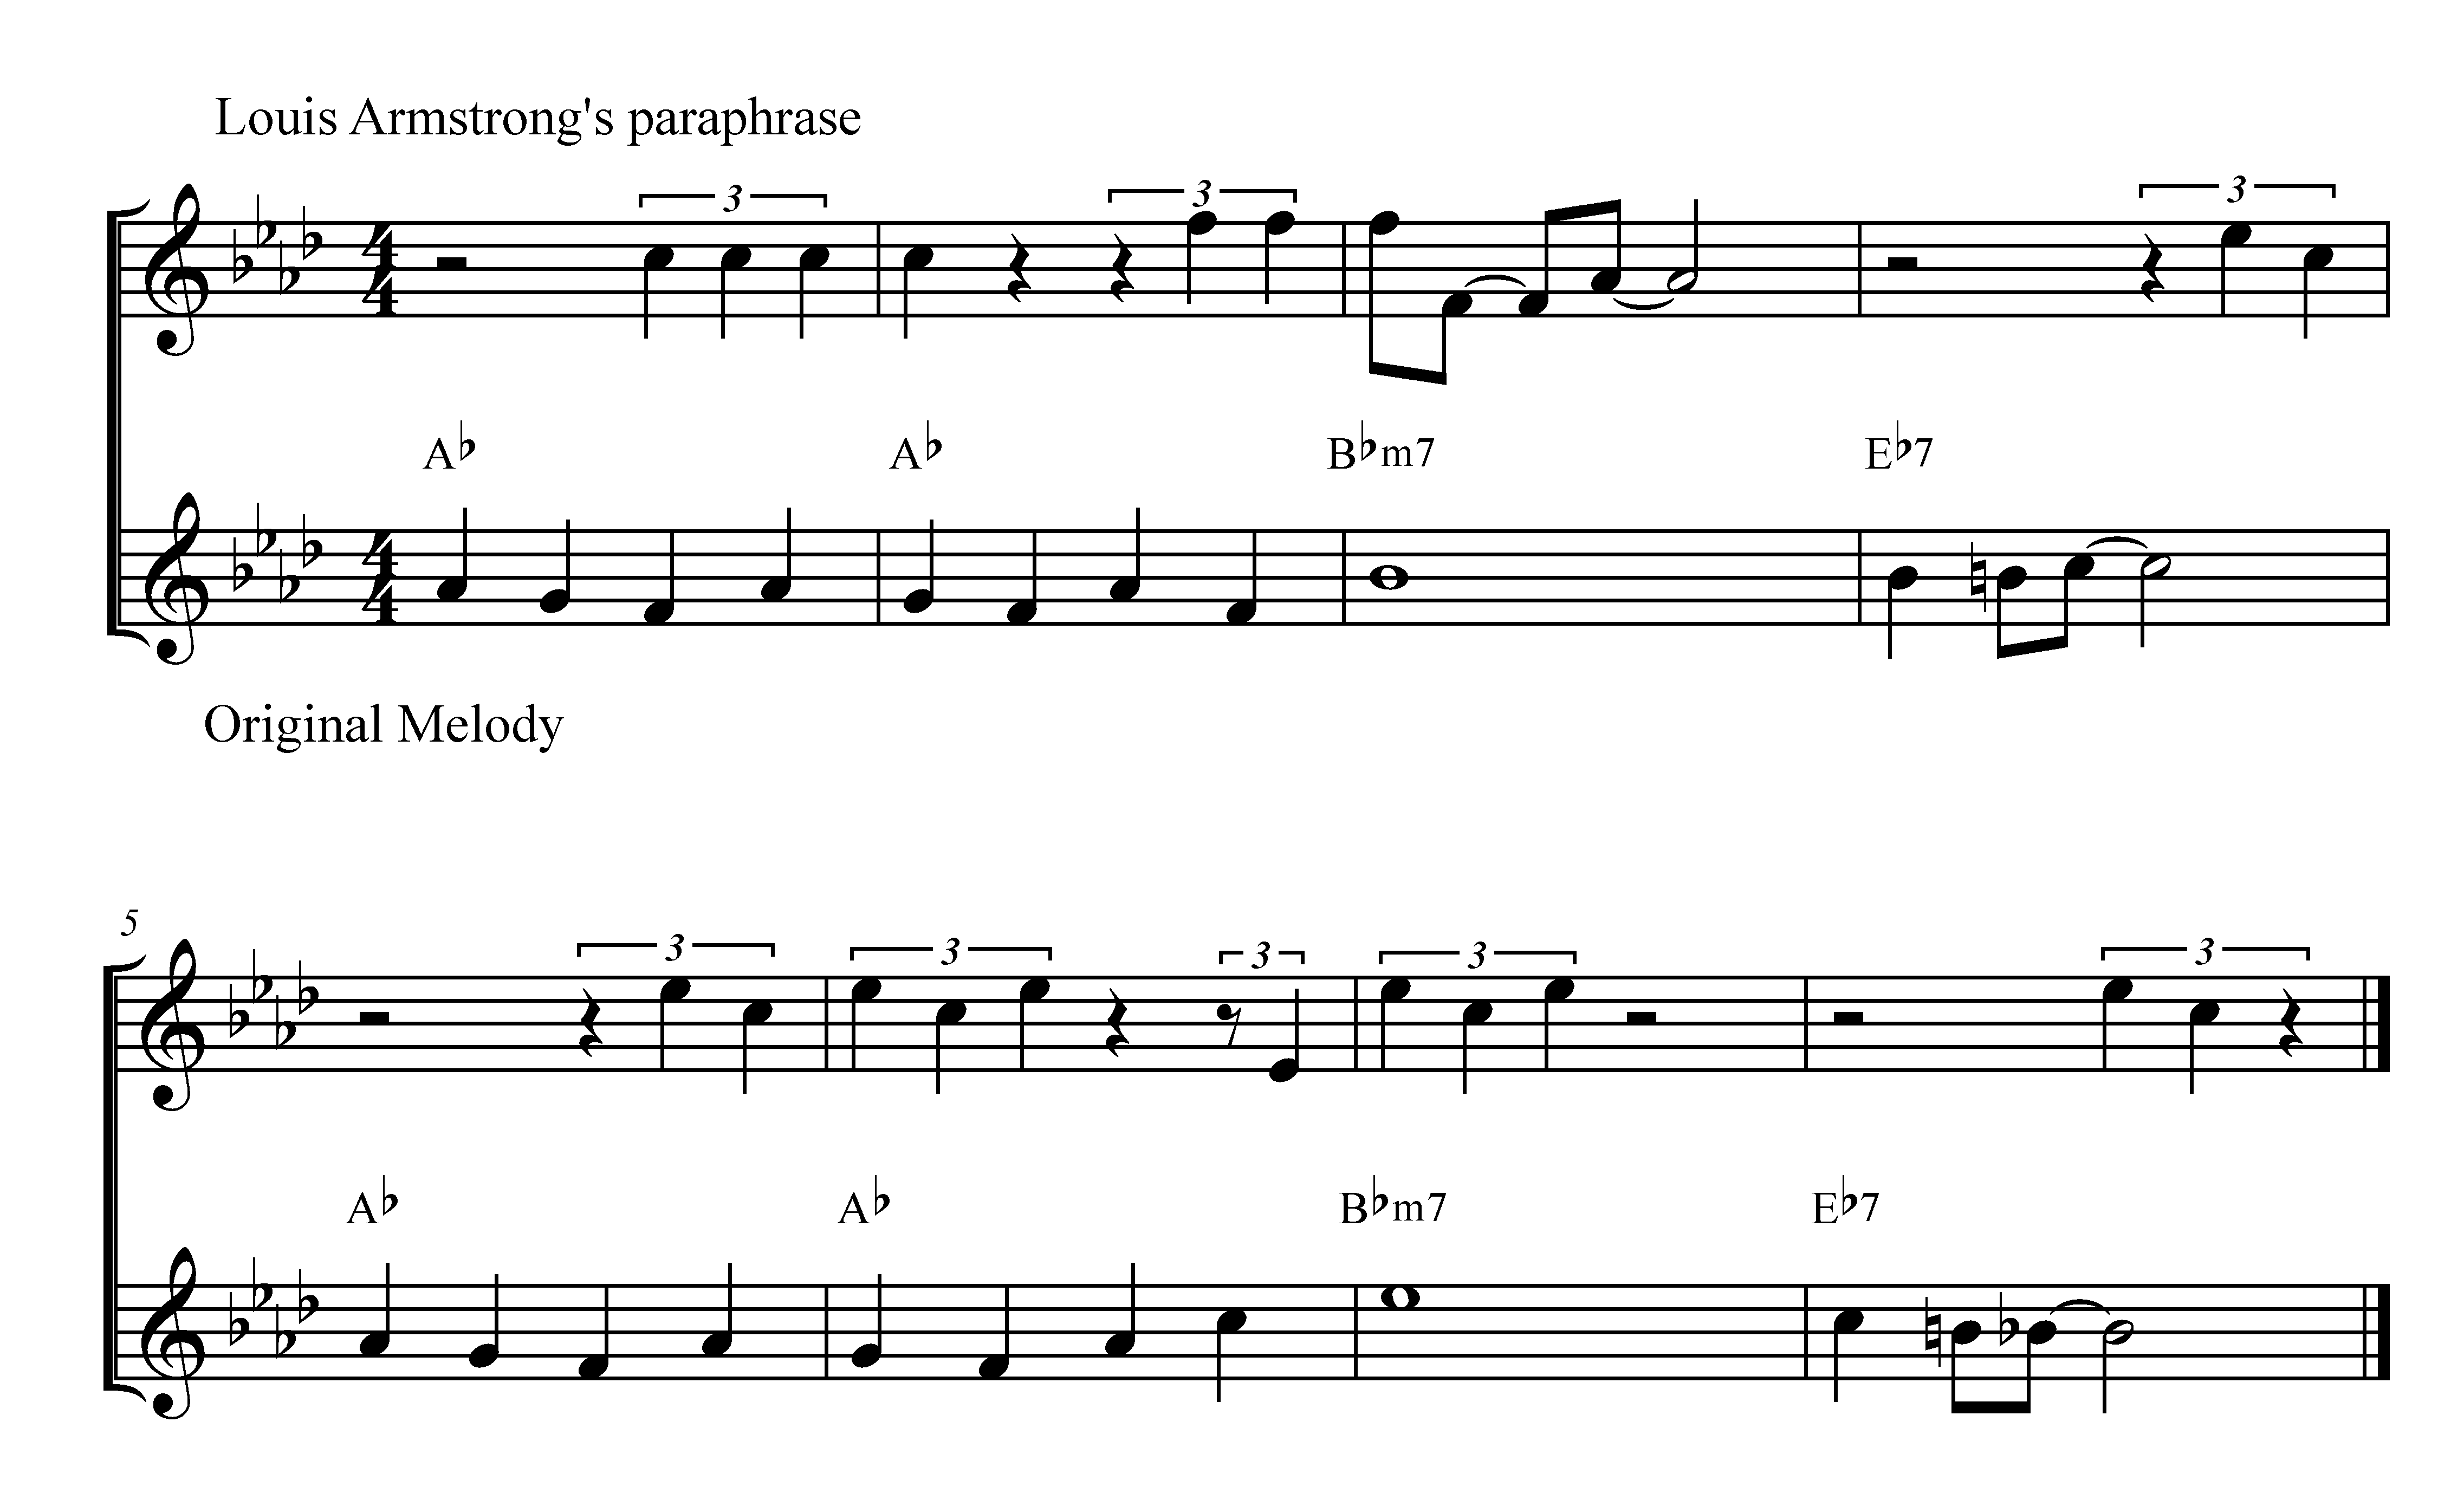 Louis Armstrong's "I Can't Give You Anything but Love"--comparing his melody with the original melody